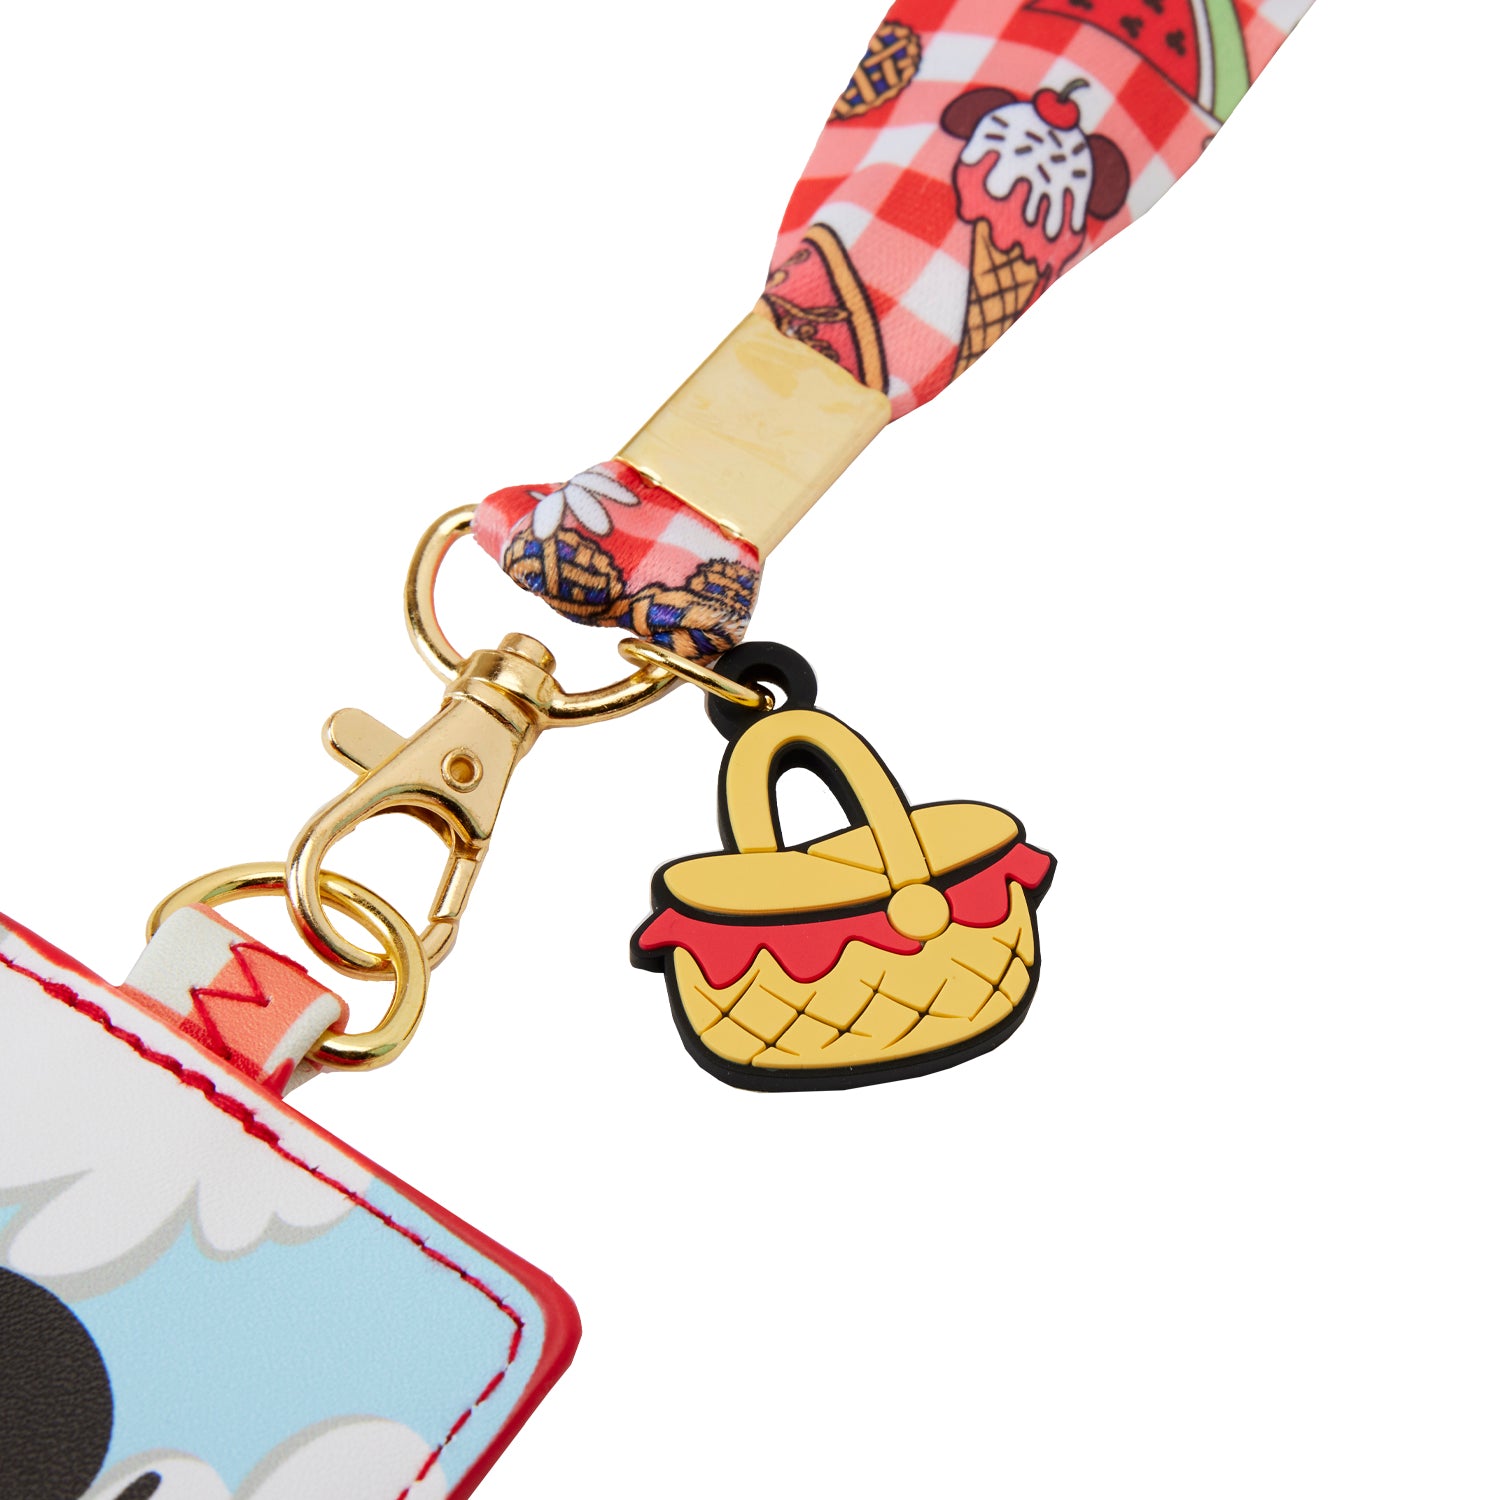 Loungefly Disney Mickey and Friend Picnic Lanyard with Cardholder